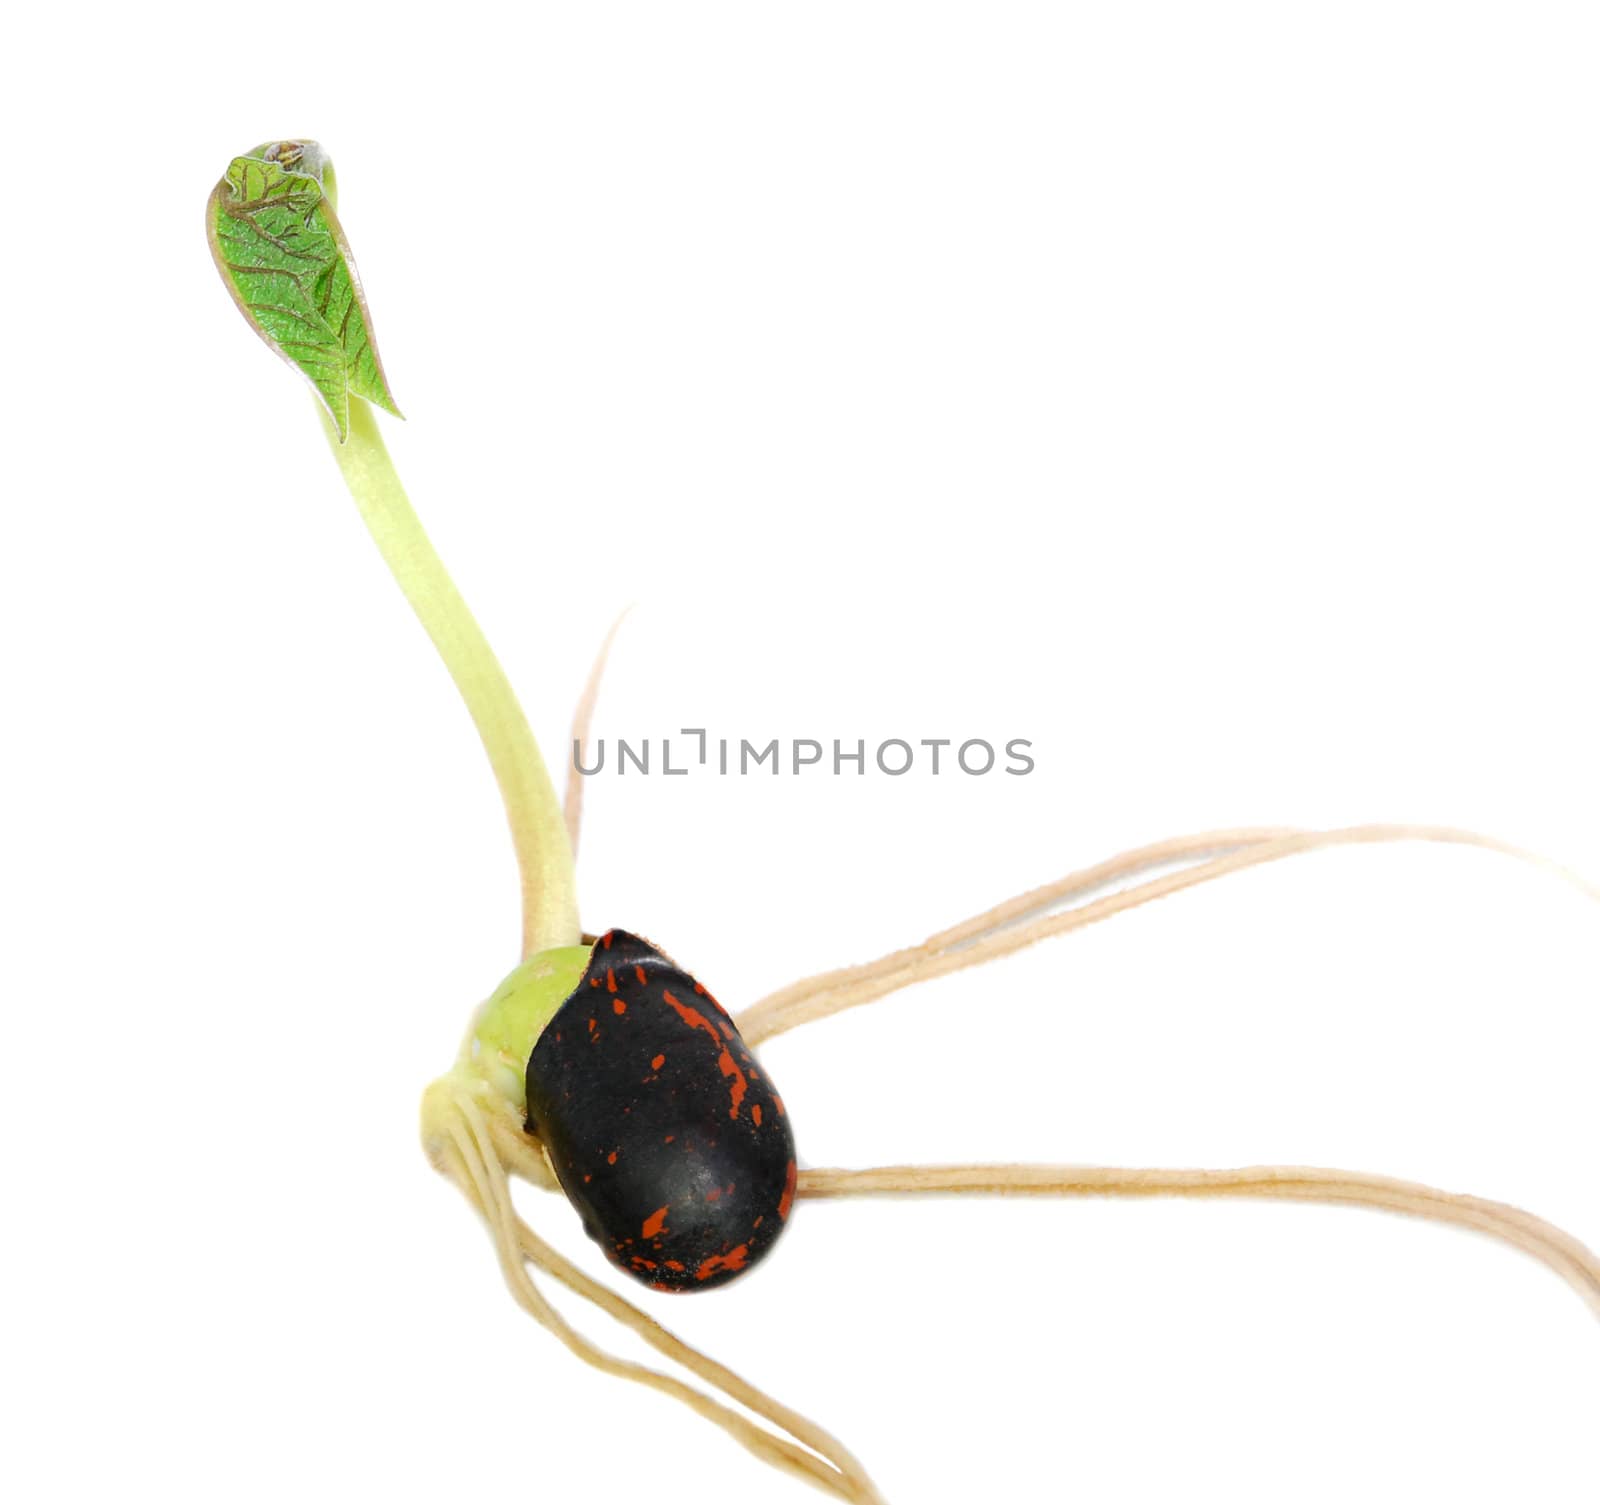 Runner bean seed with a green leaf shoot by sarahdoow